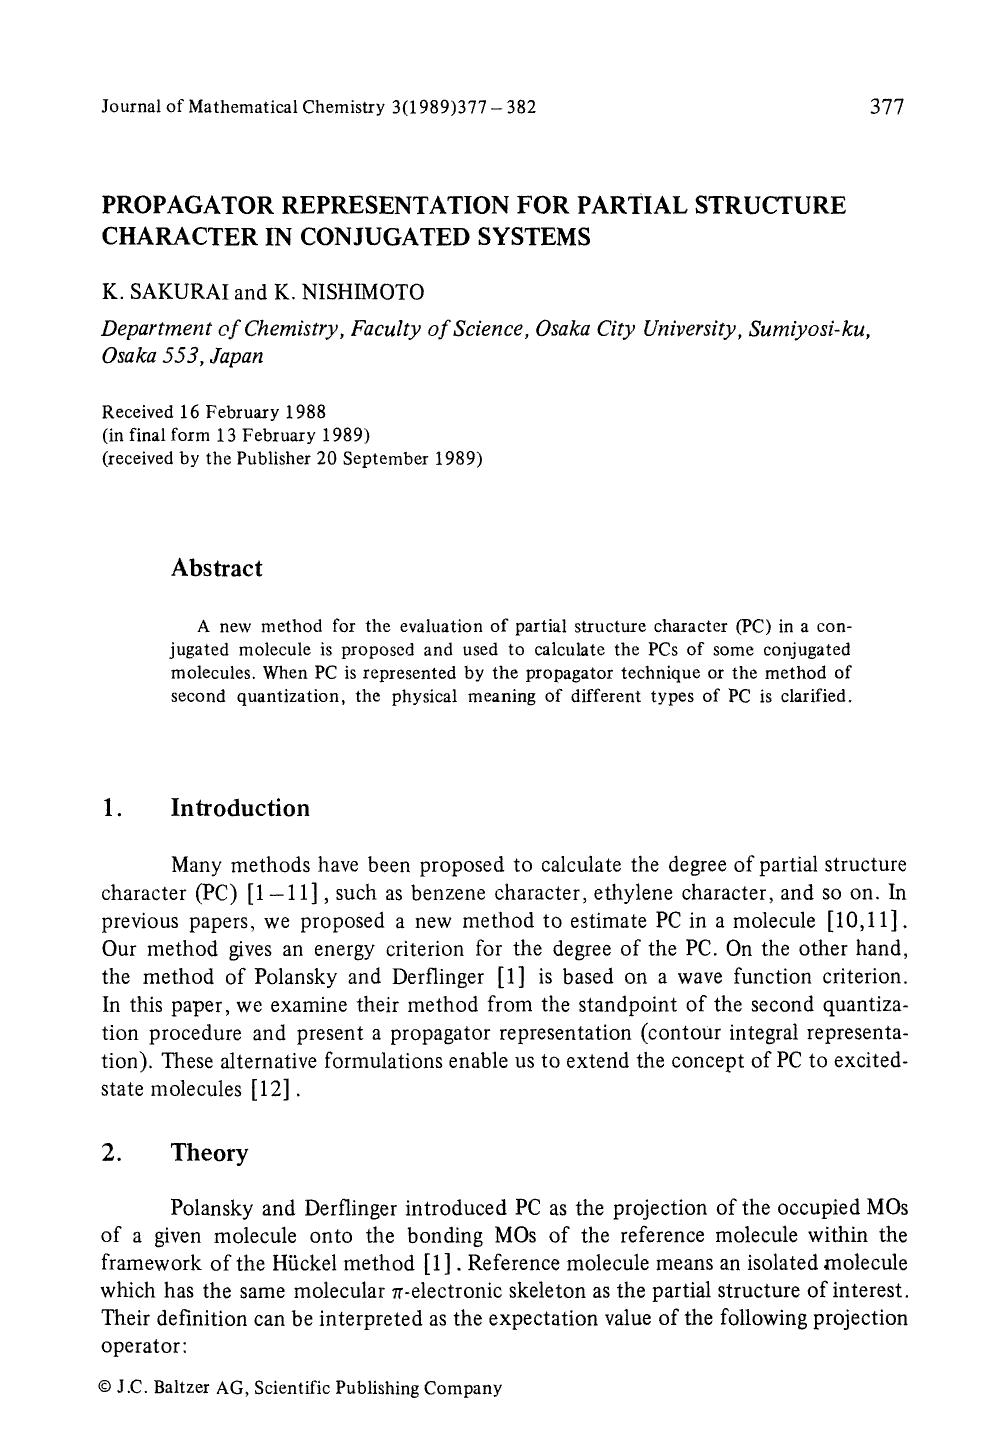 Propagator representation for partial structure character in conjugated systems by Unknown